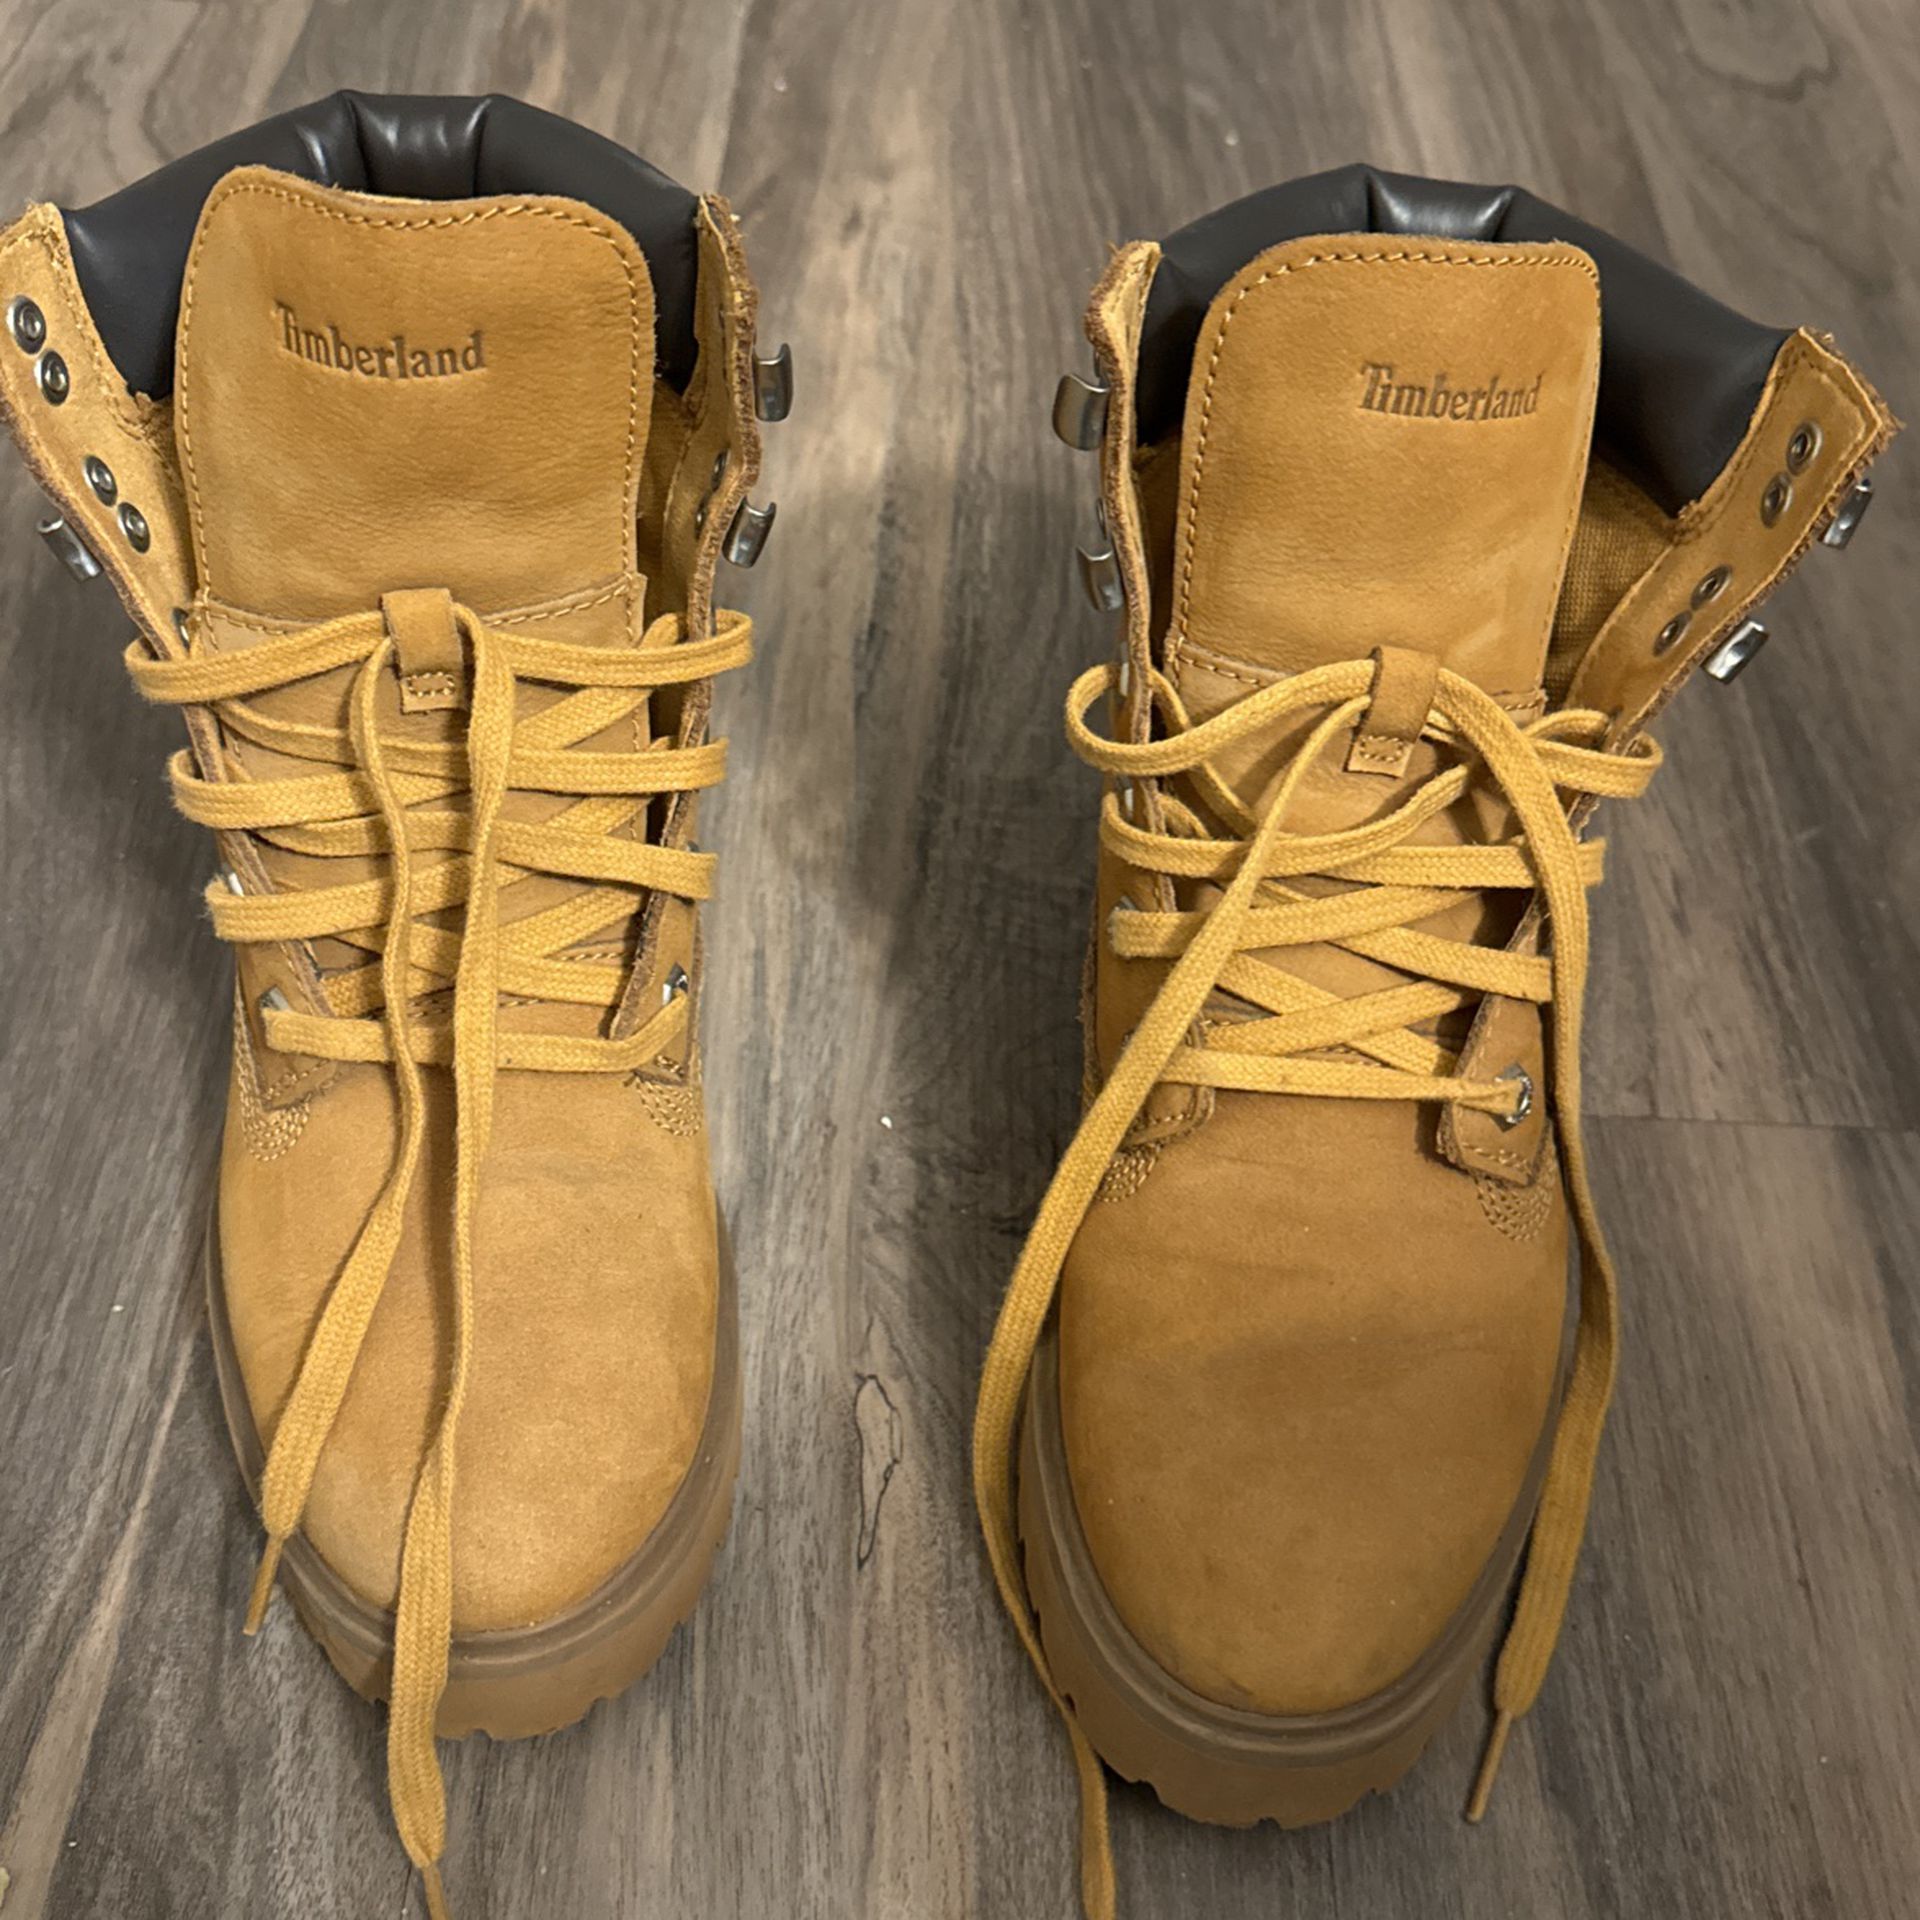 Women’s/ young ladies Size 6 Timberland Boots